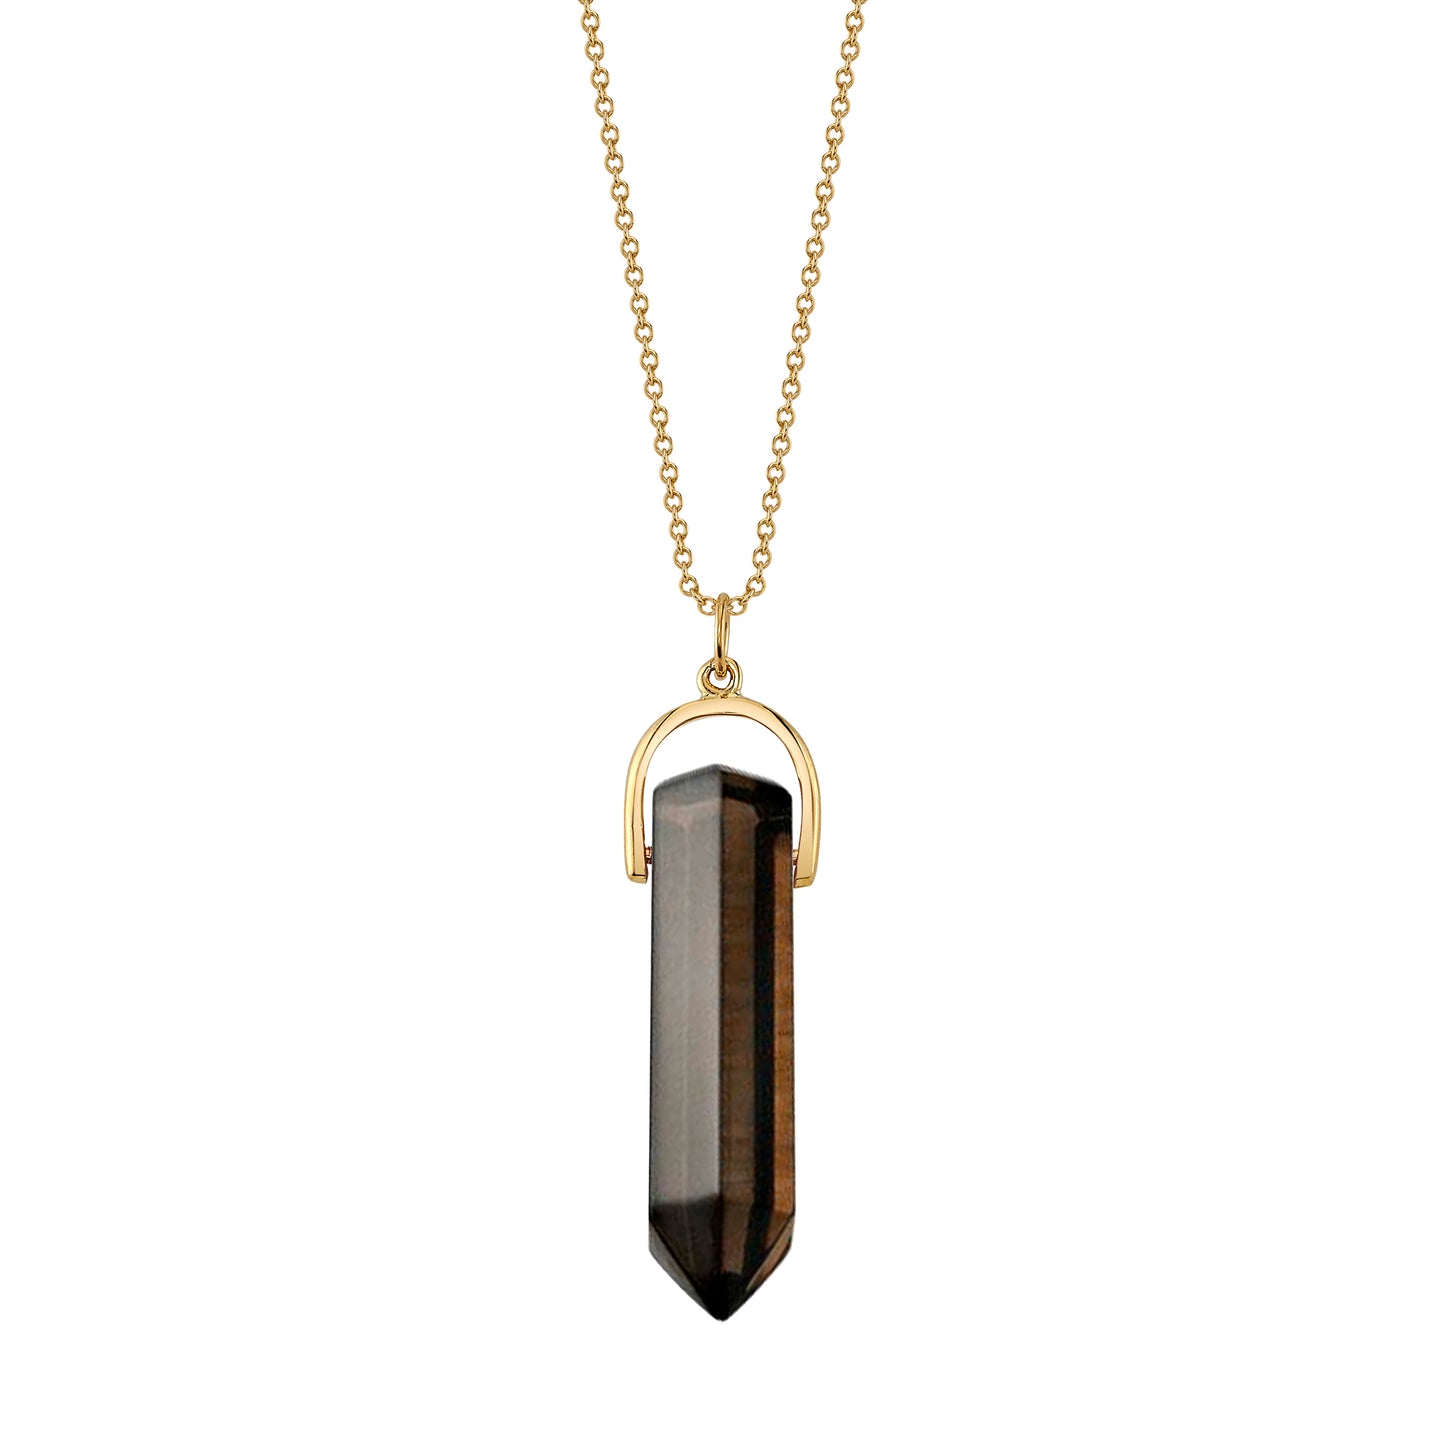 CRYSTAL POINT PENDANT